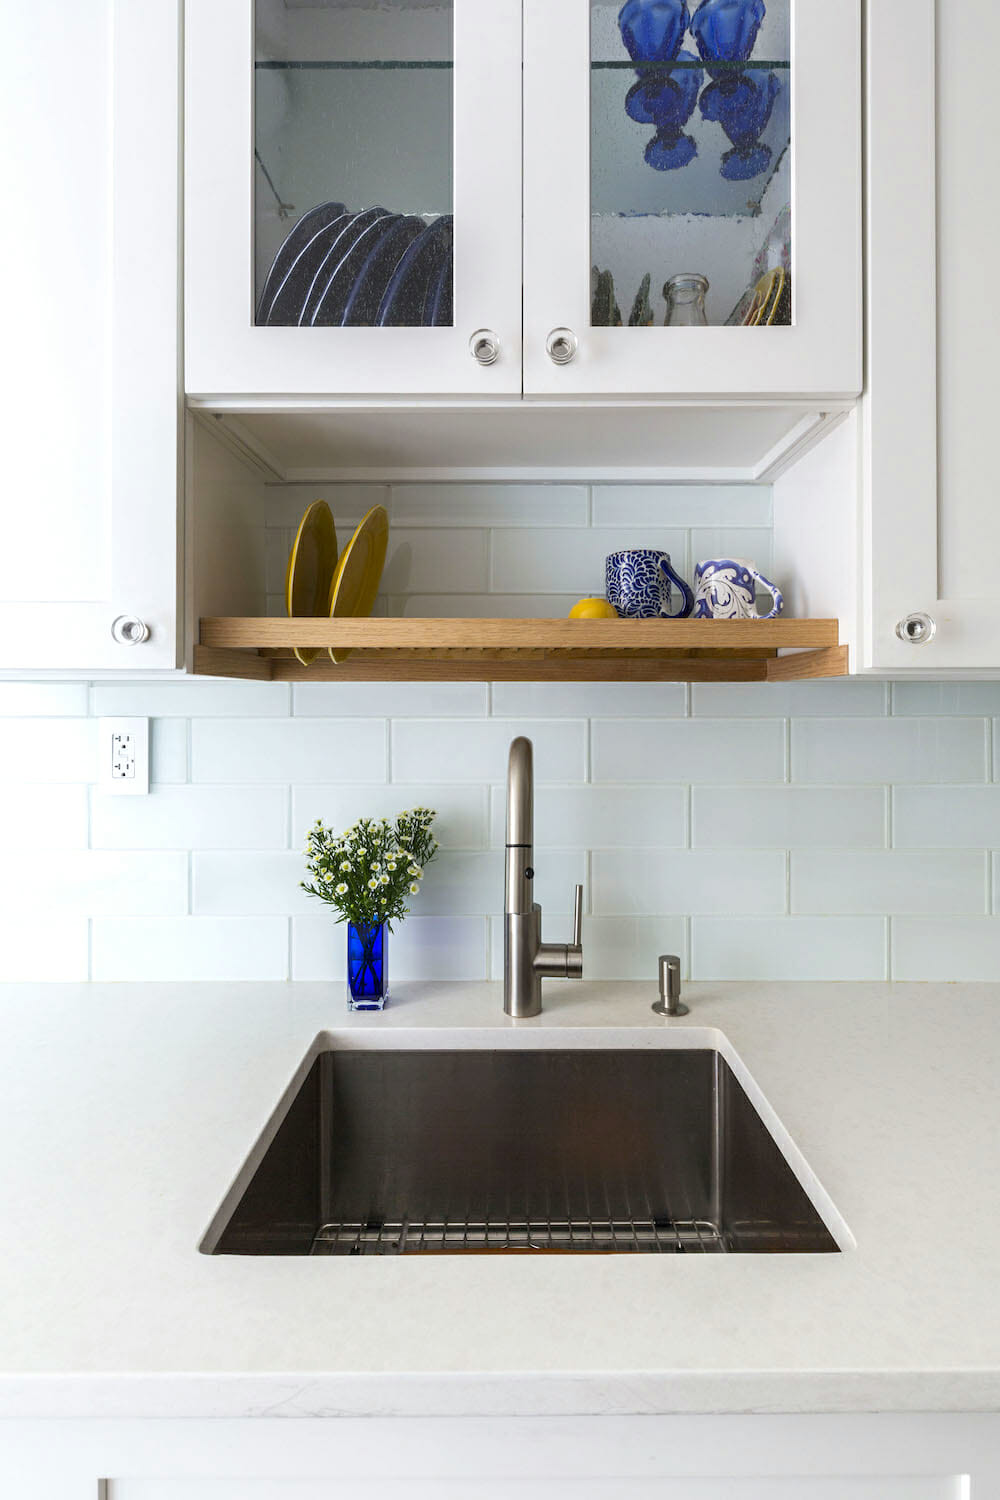 18 Savvy Ideas to Maximize Your Small Kitchen Remodel